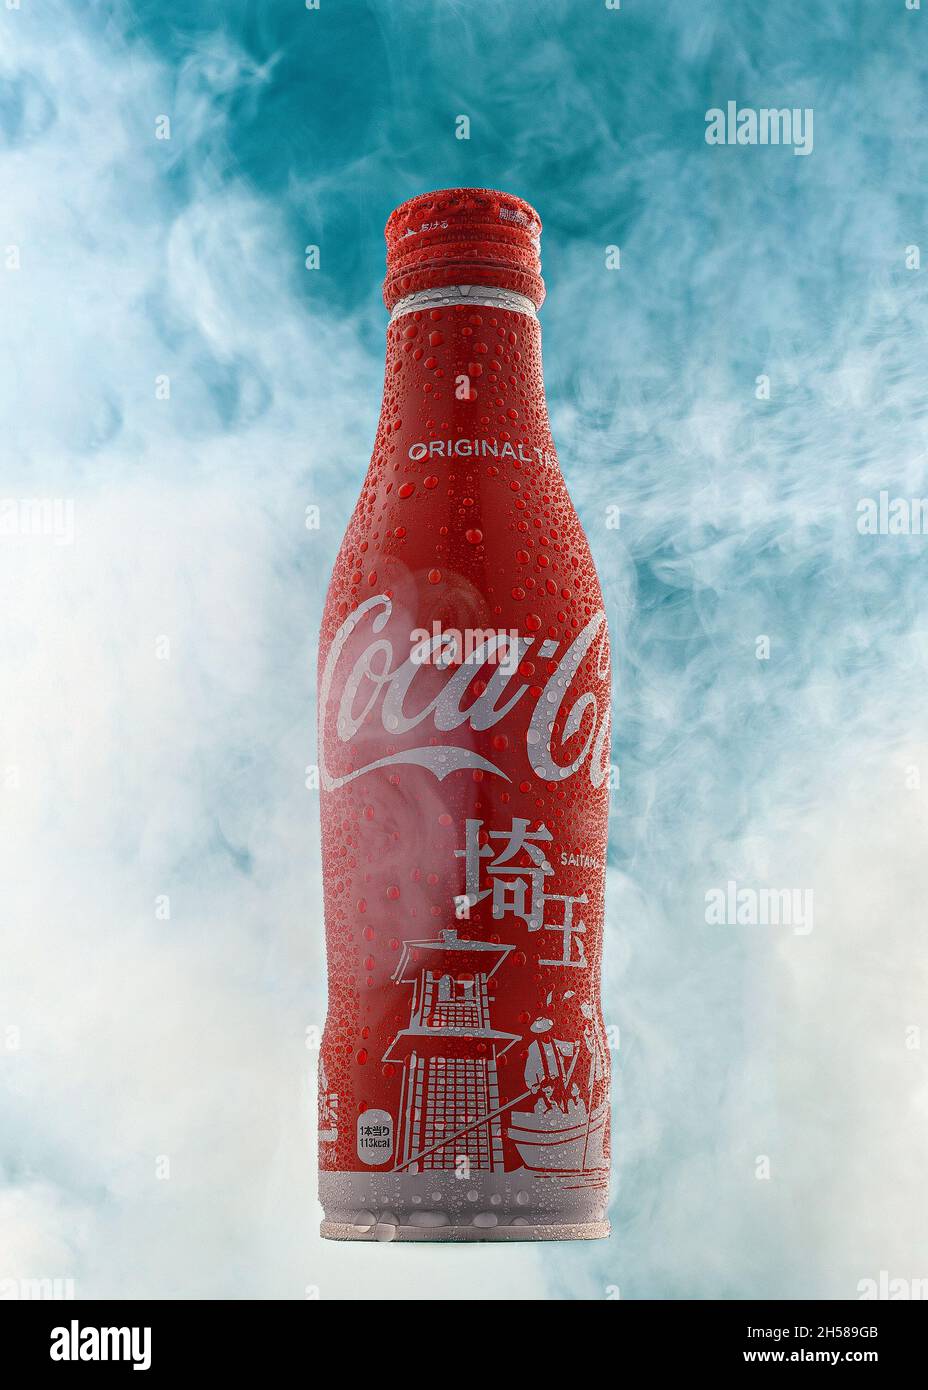 Editorial shot of a Coca Cola Japanese version bottle shot on vertical surrounded by fog with water drips on it. Illustrative single bottle Stock Photo